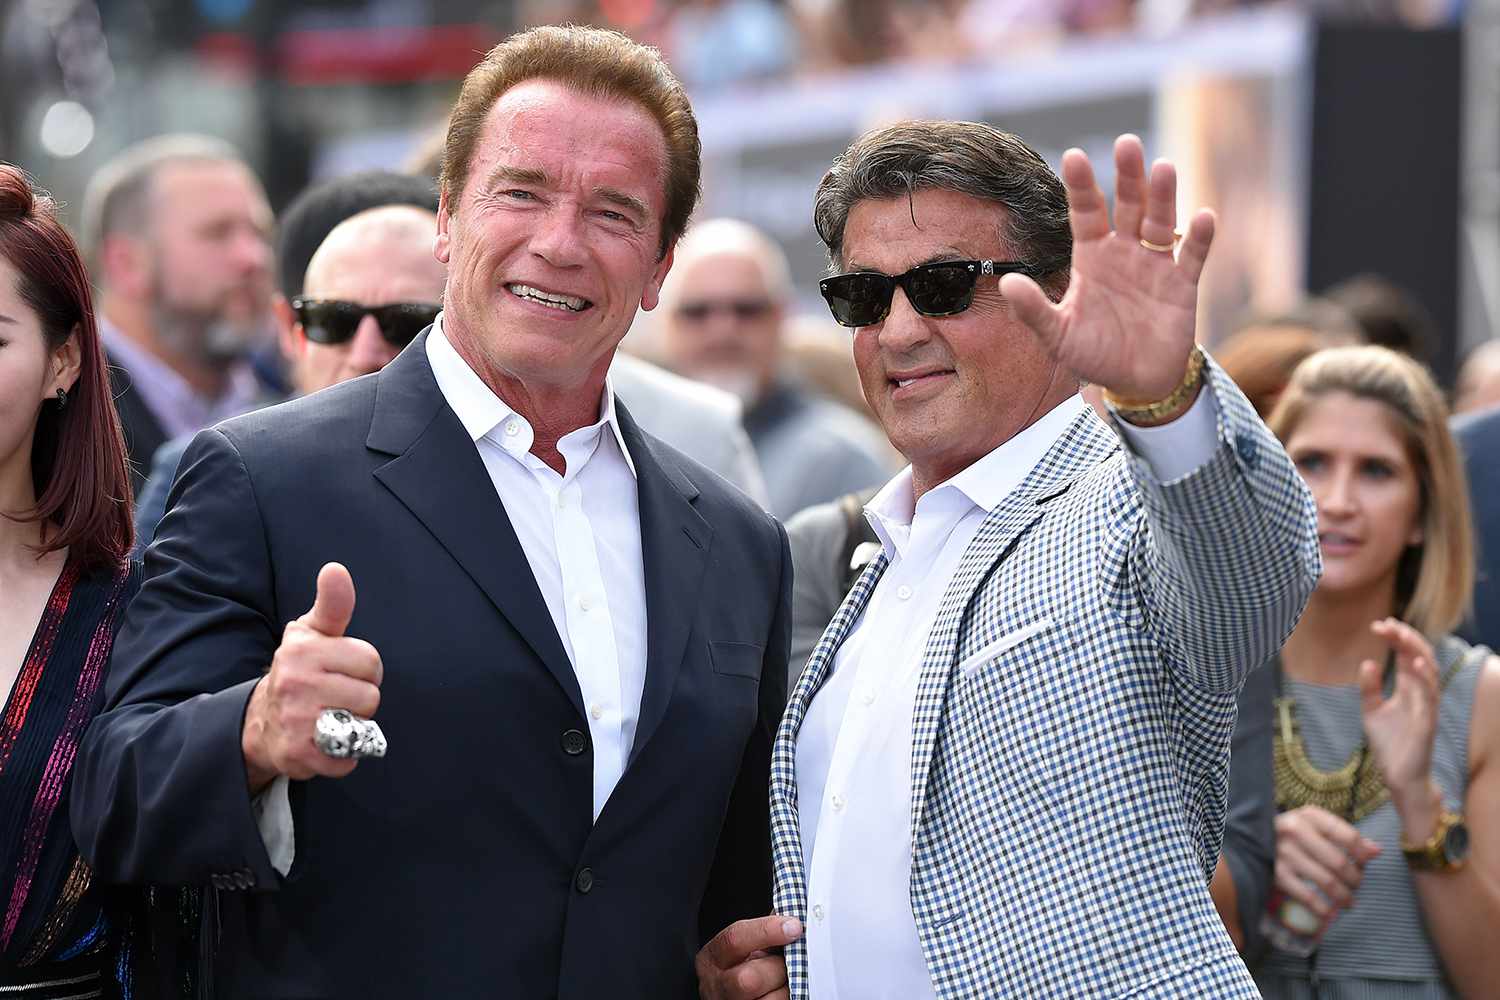 Actors Arnold Schwarzenegger and Sylvester Stallone arrive at the Los Angeles premiere of 'Terminator Genisys' at Dolby Theatre on June 28, 2015 in Hollywood, California.